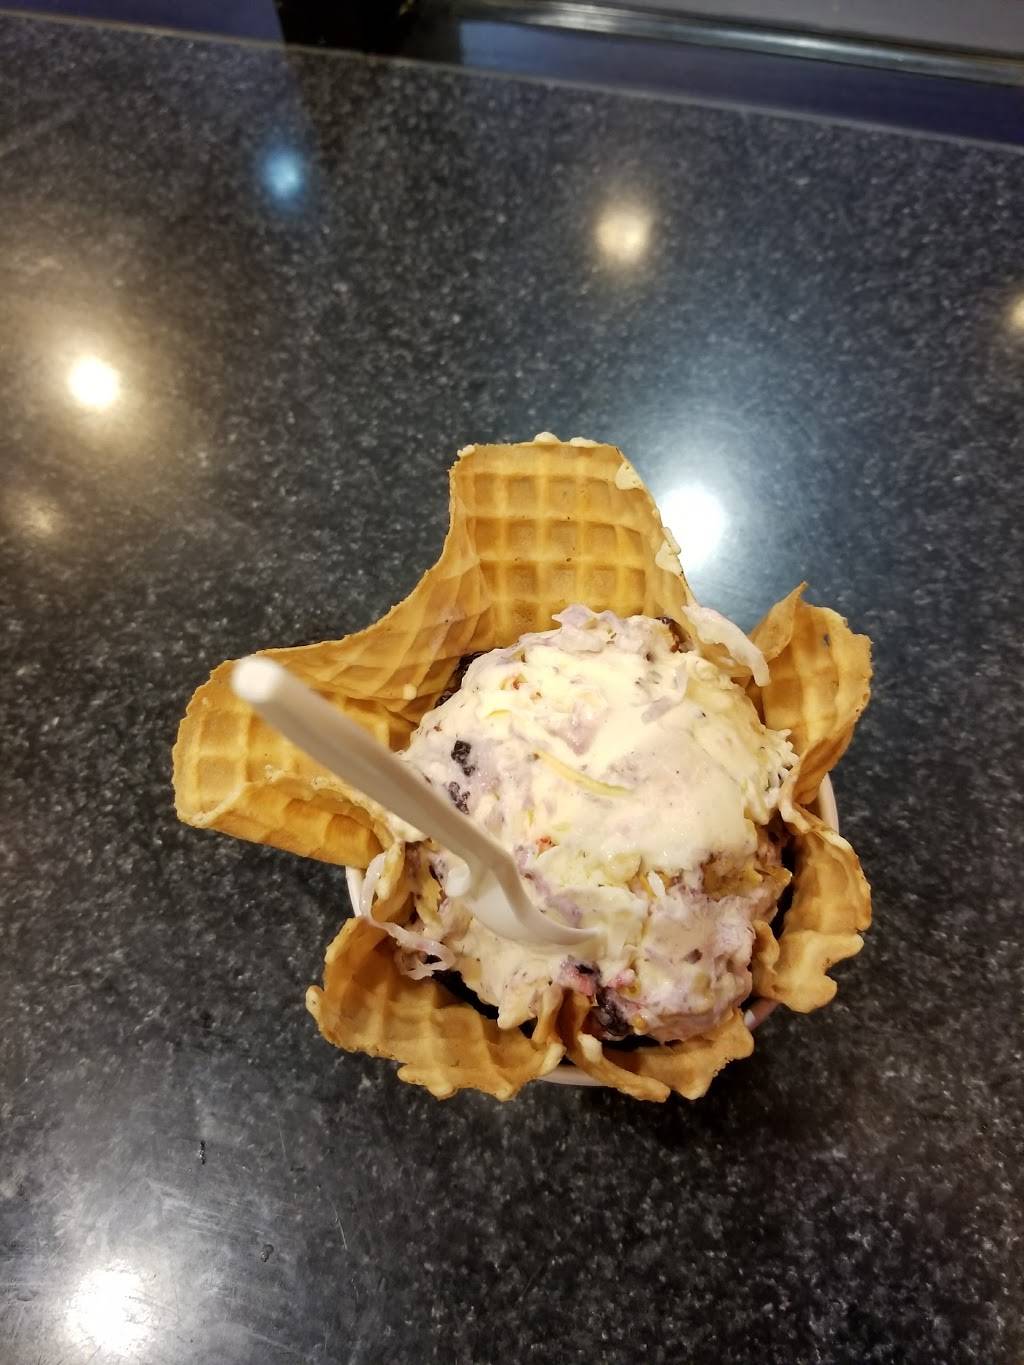 Cold Stone Creamery | bakery | 2323 Black Rock Turnpike, Fairfield, CT 06825, USA | 2033714111 OR +1 203-371-4111